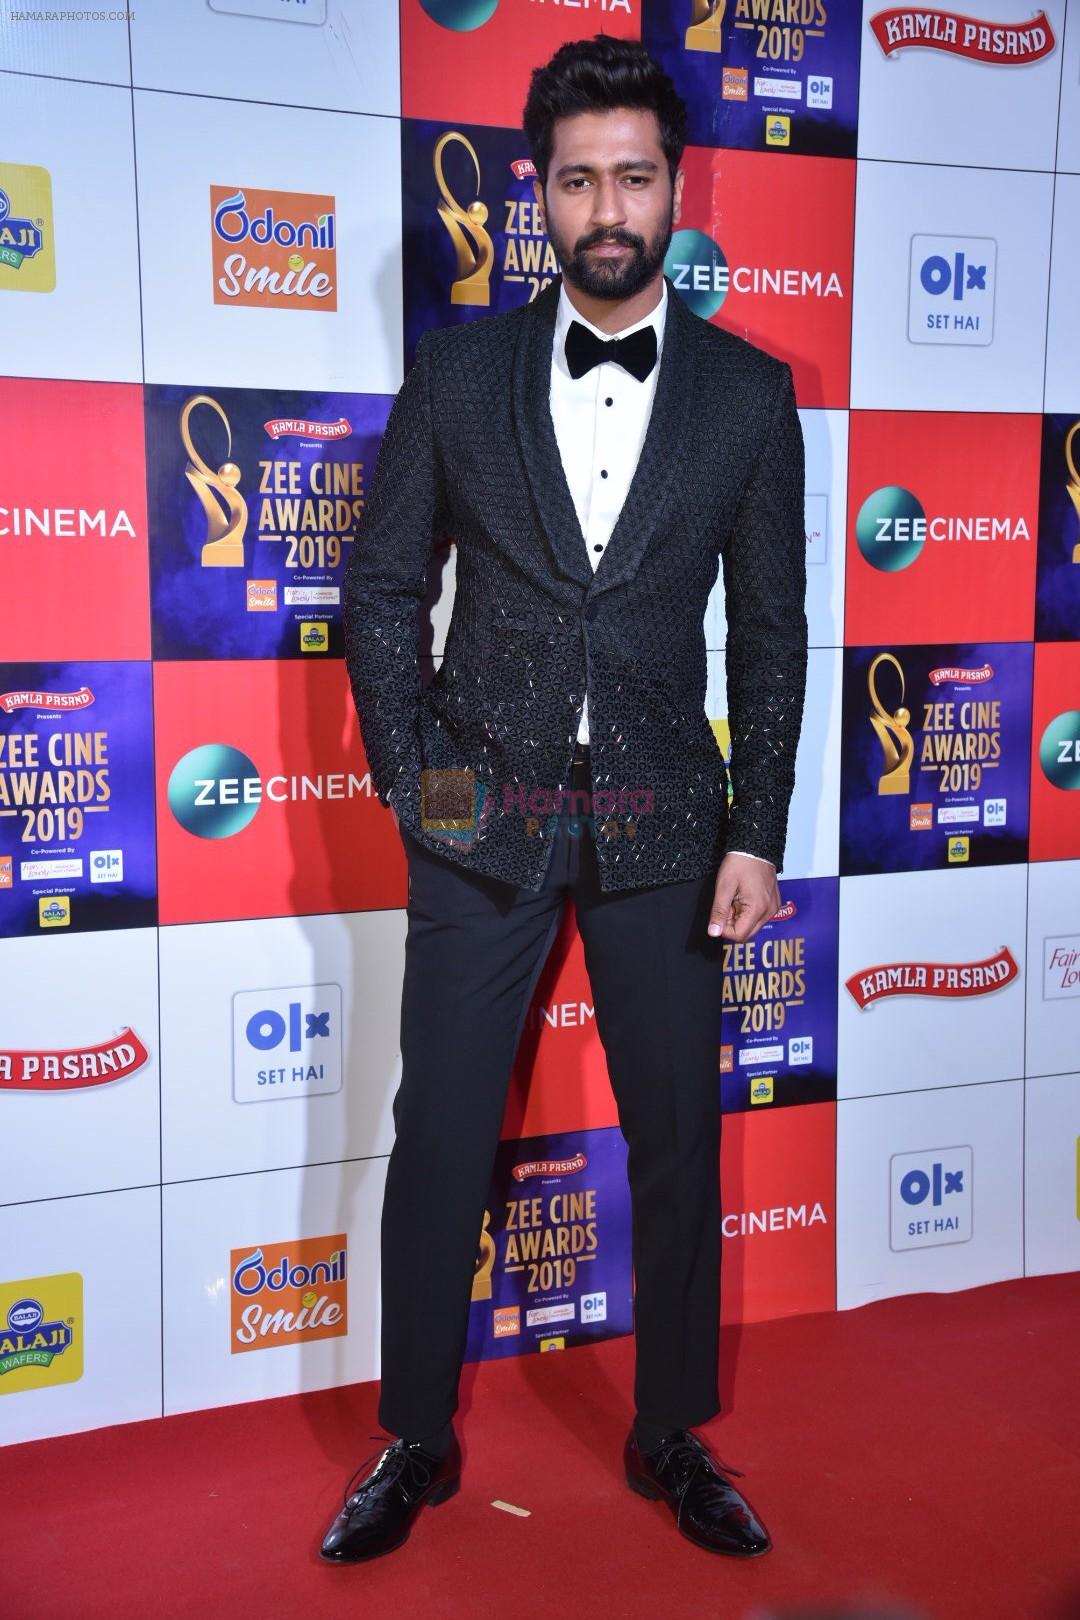 Vicky Kaushal at Zee cine awards red carpet on 19th March 2019